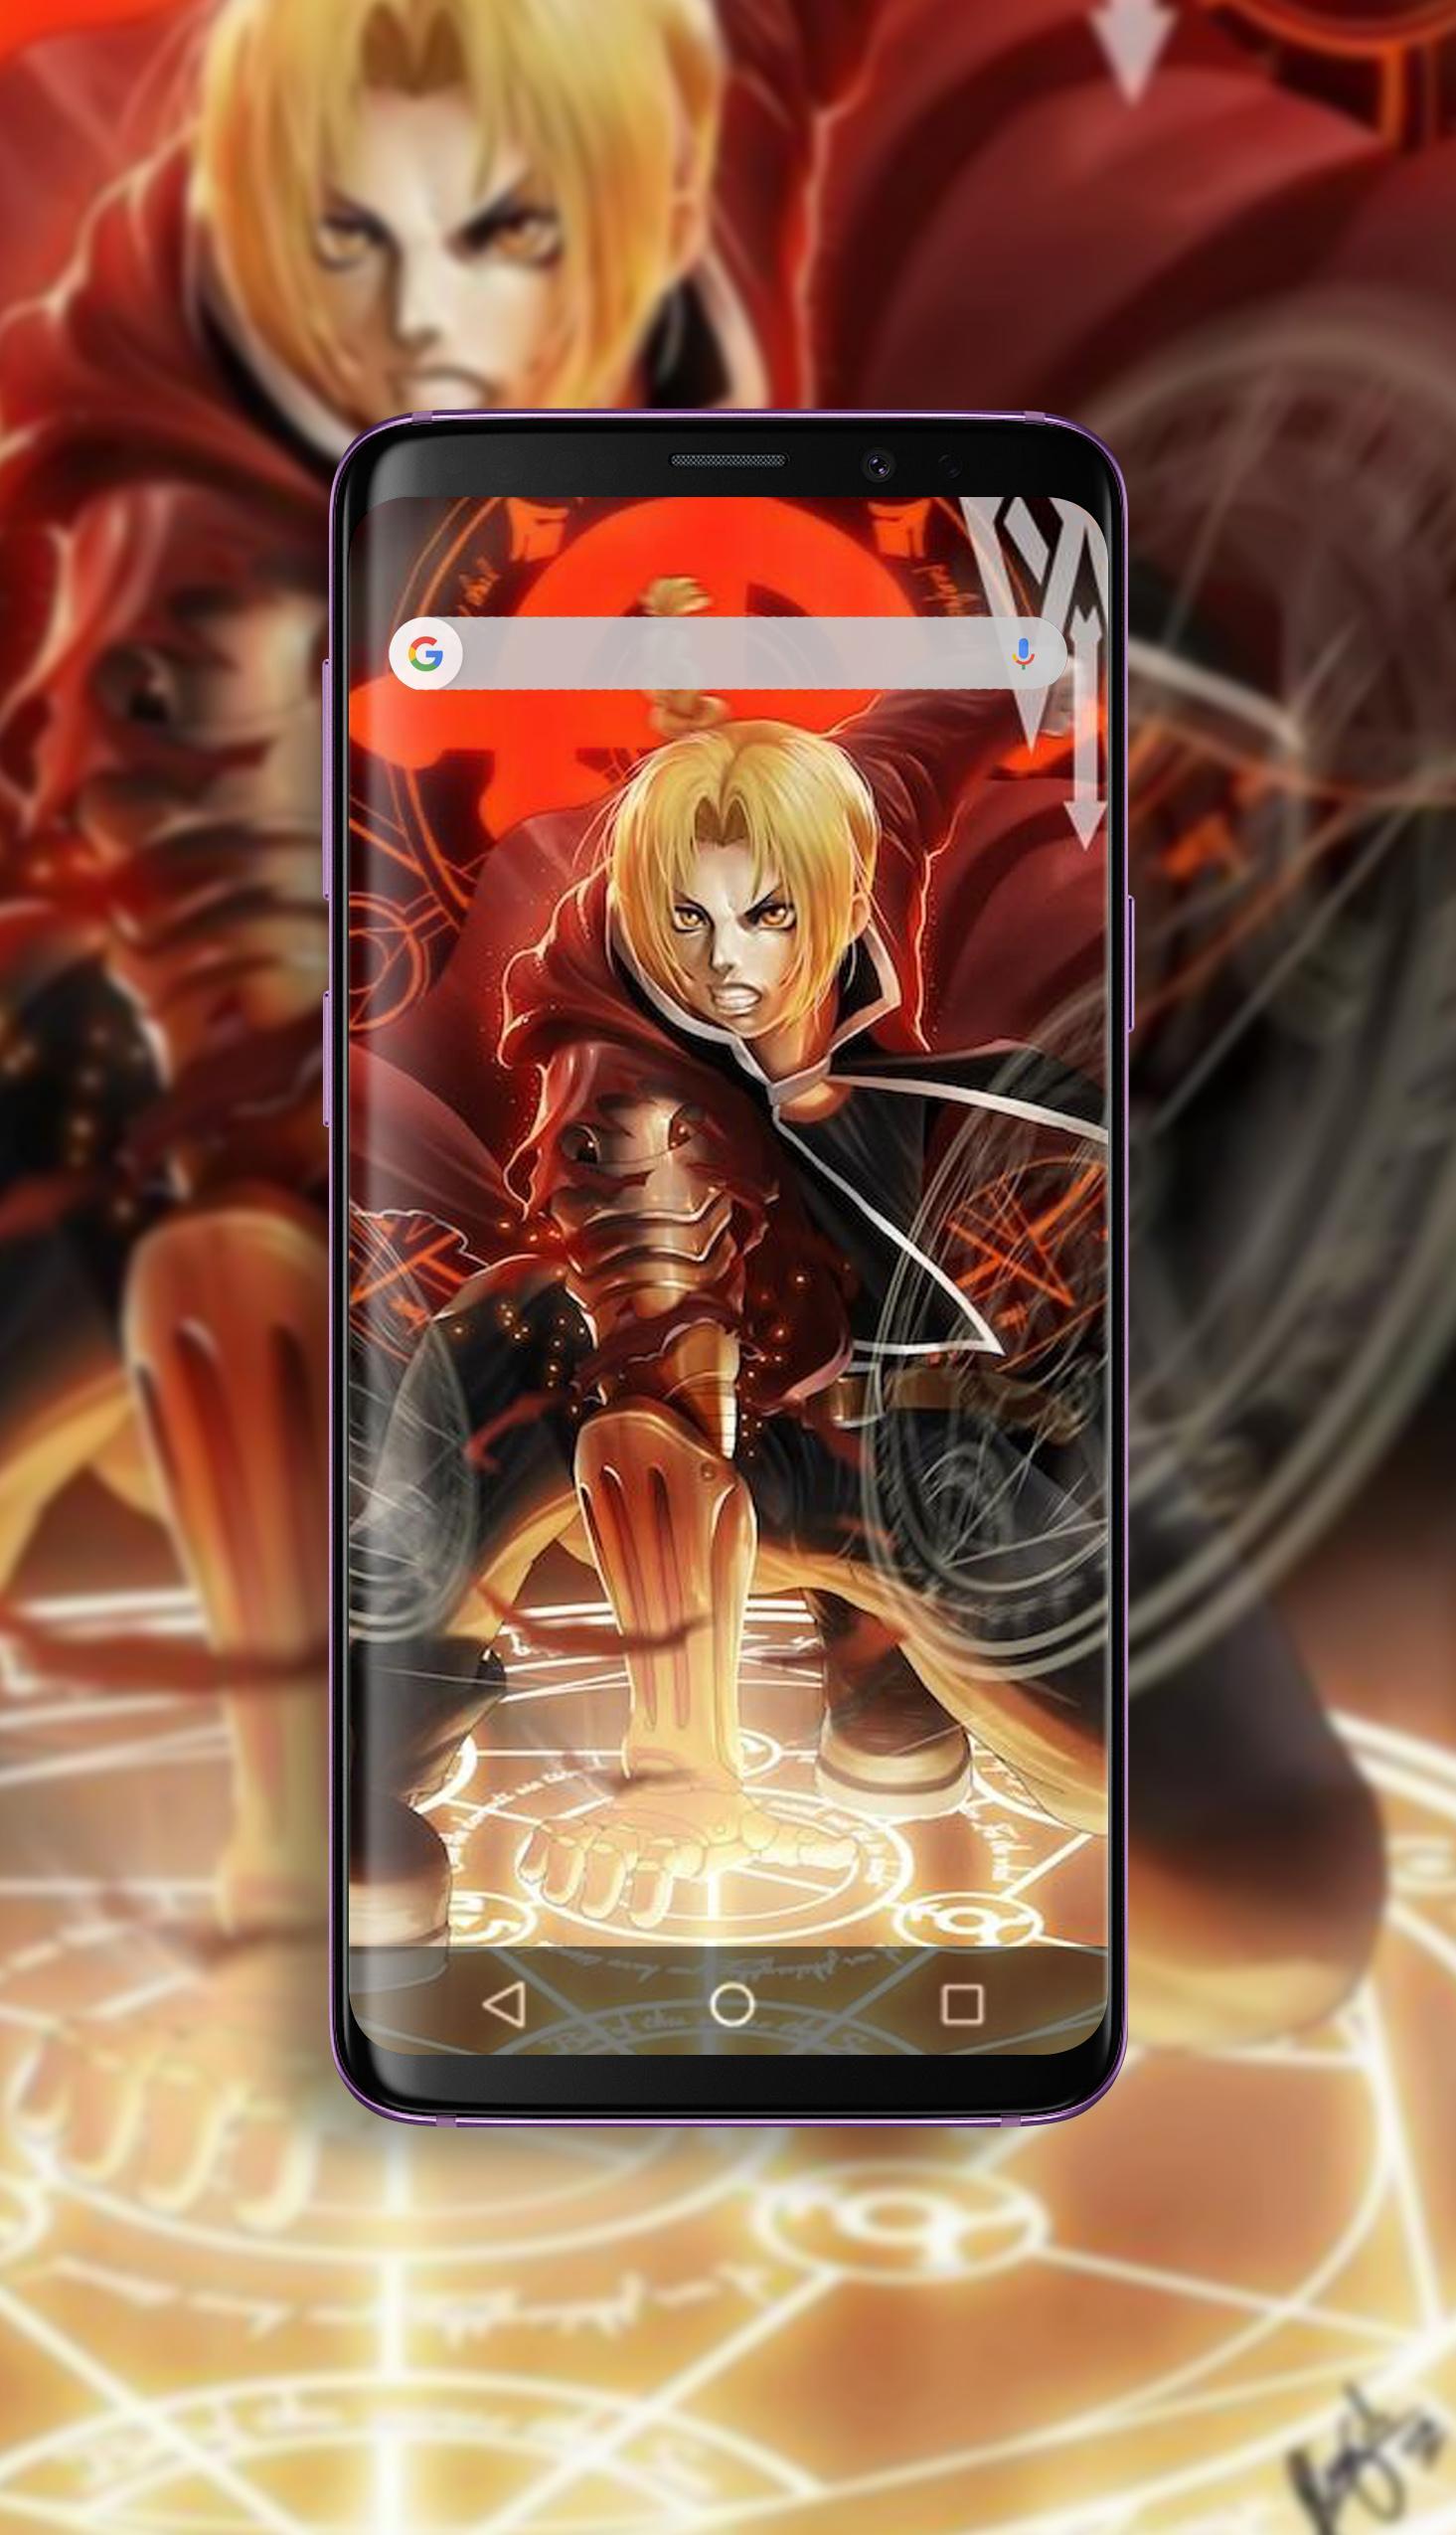 Edward Elric Wallpaper Hd For Android Apk Download - edward elric roblox